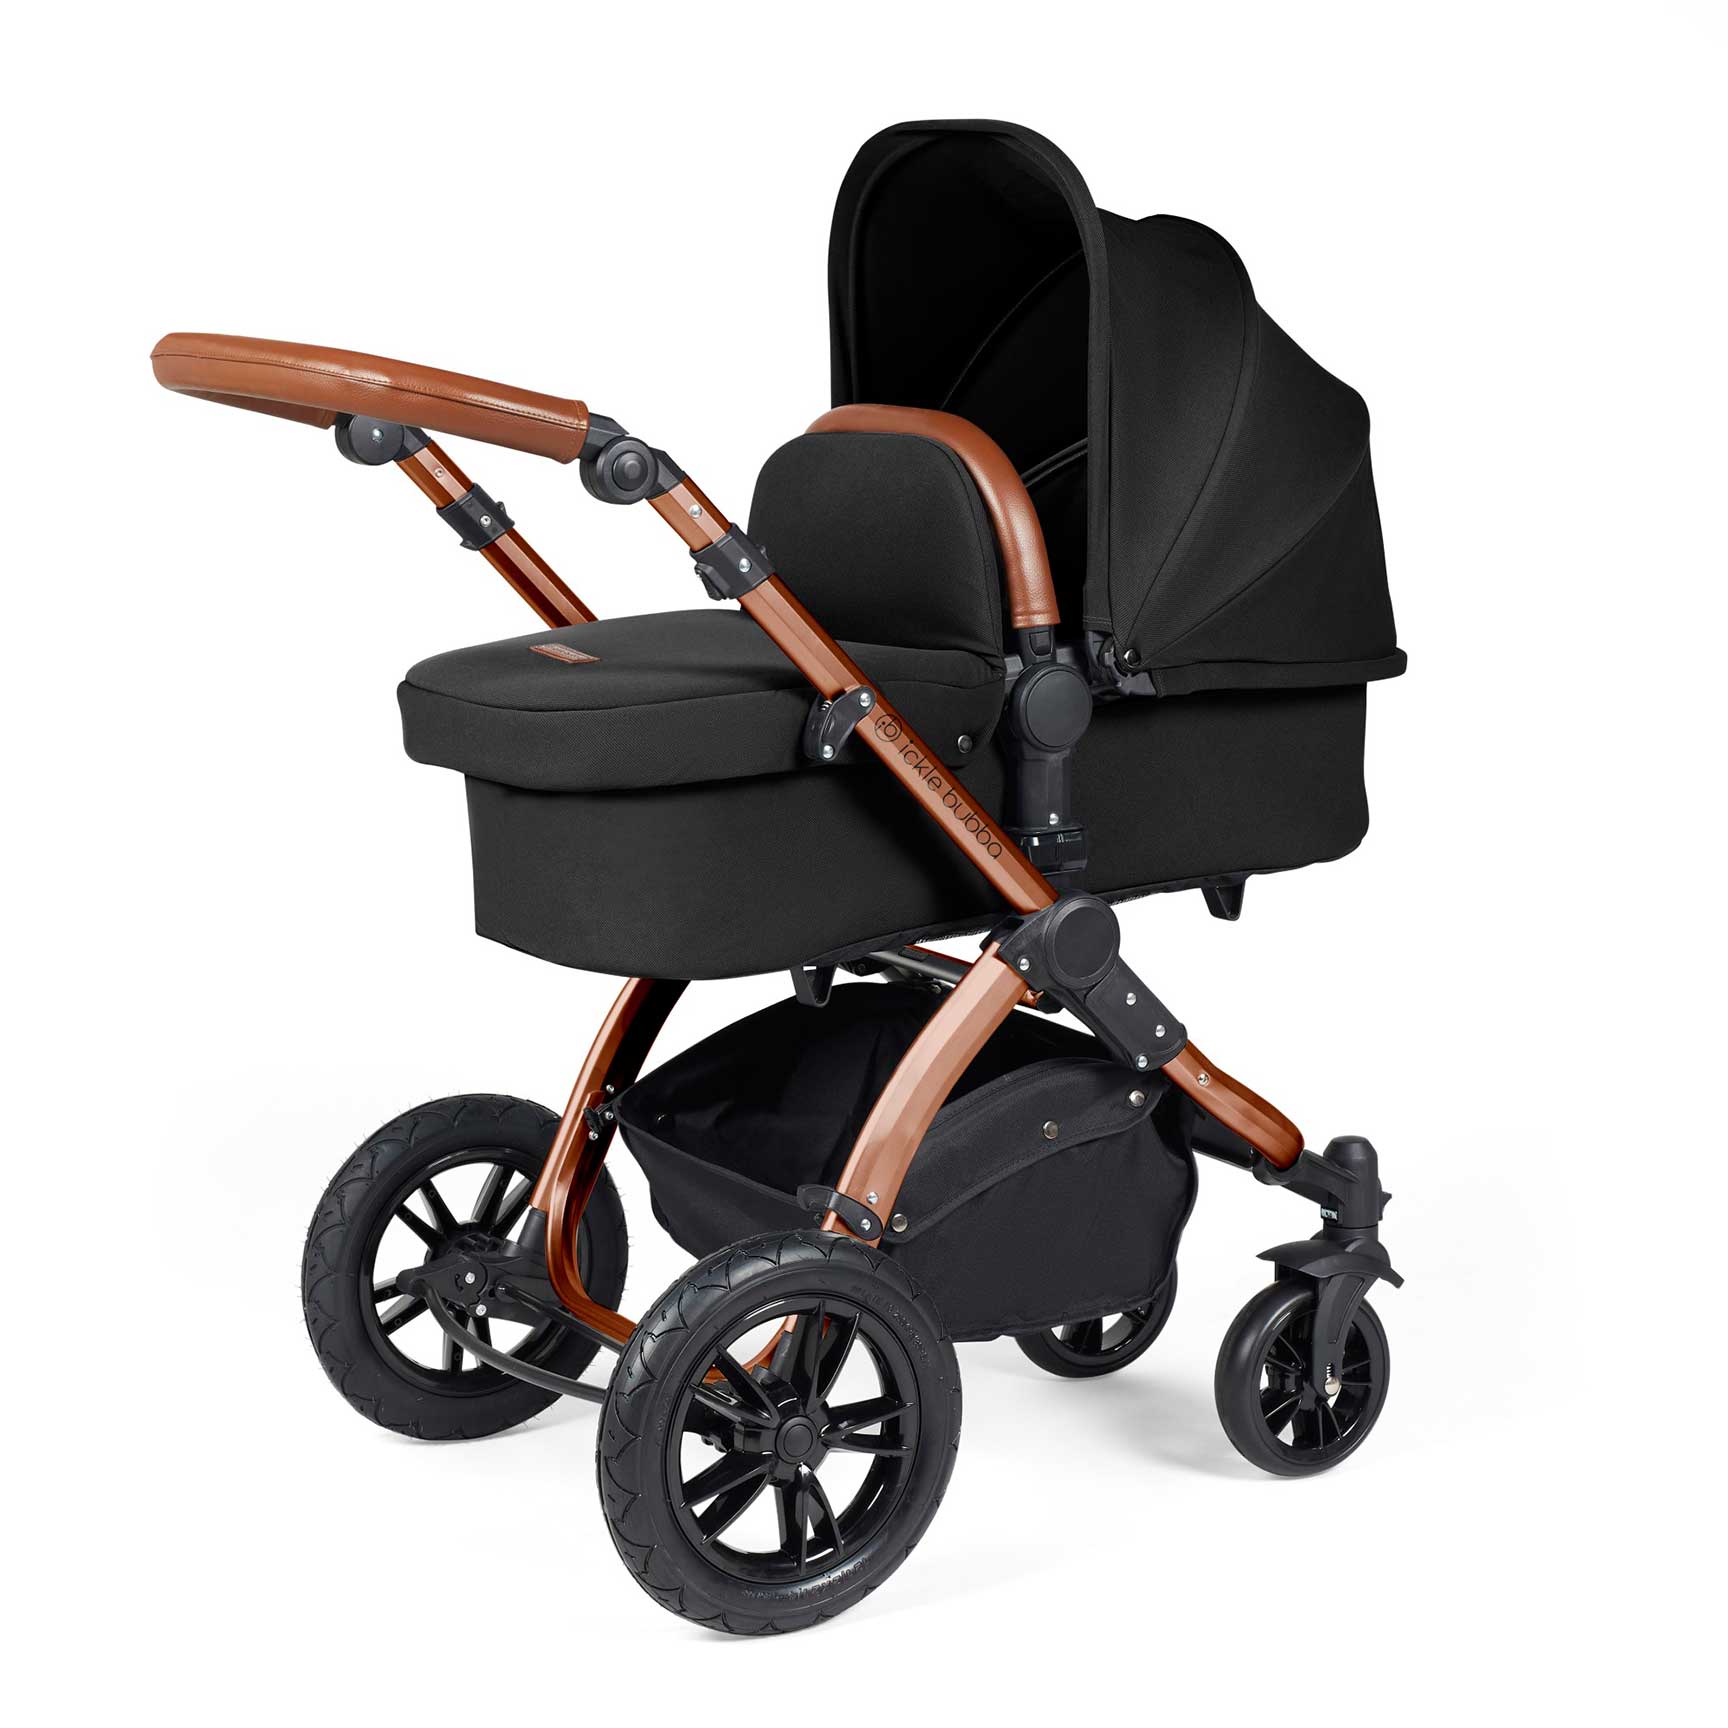 Ickle Bubba Ickle Bubba Stomp Luxe All-in-One Travel System with Isofix Base - Bronze/Midnight/Tan 10-011-300-021